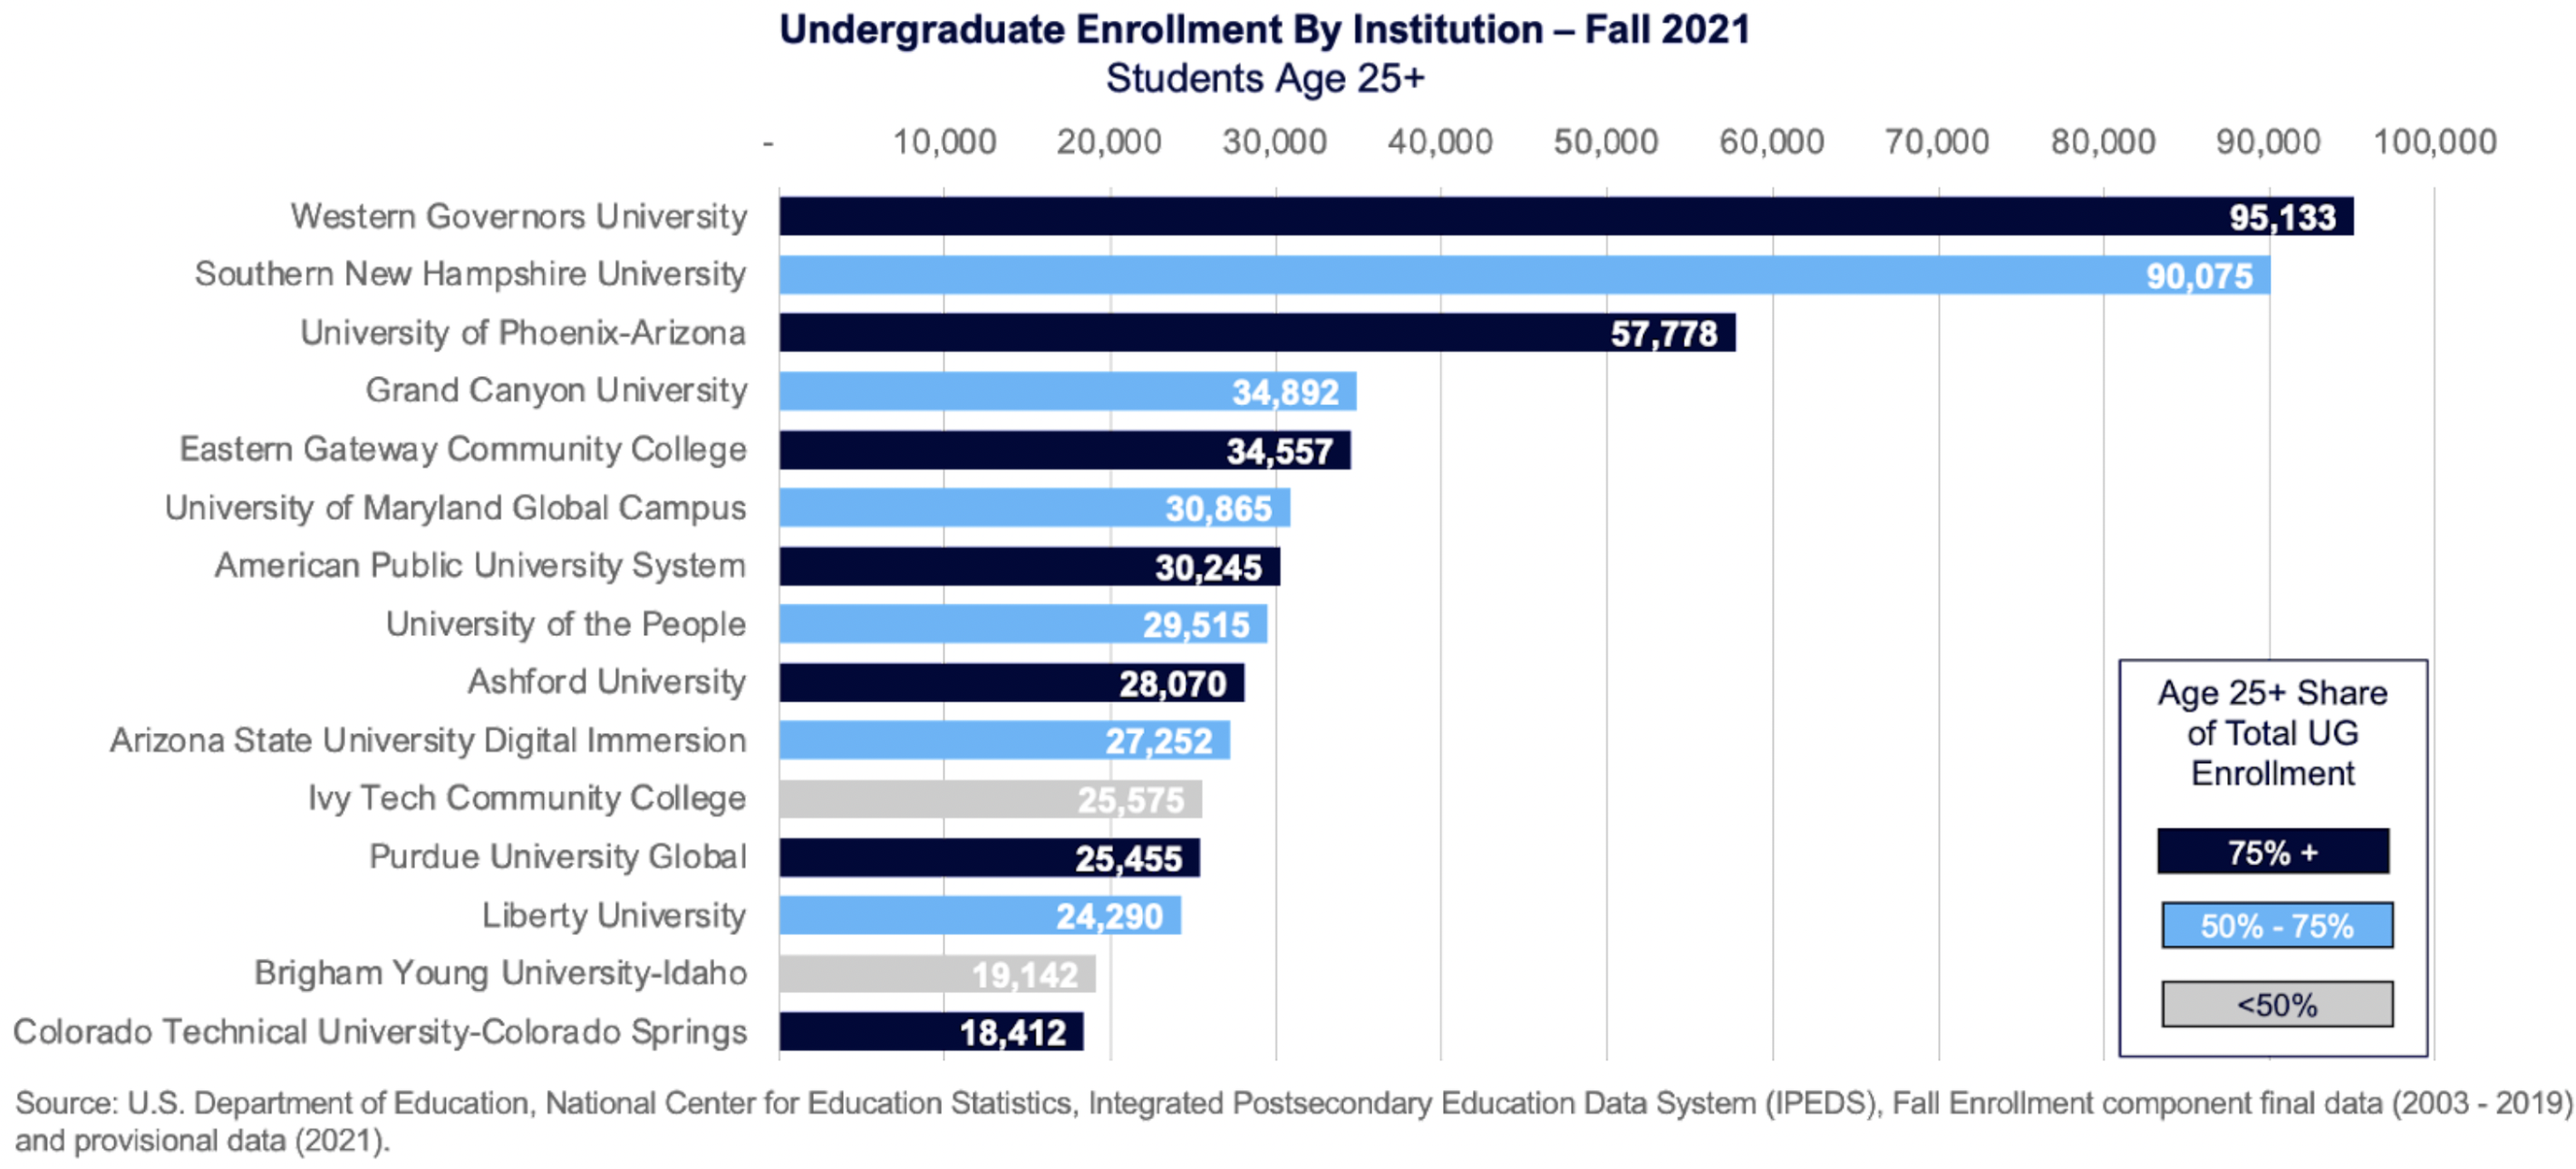 Undergraduate Enrollment By Institution - Fall 2021 (students aged 25+)